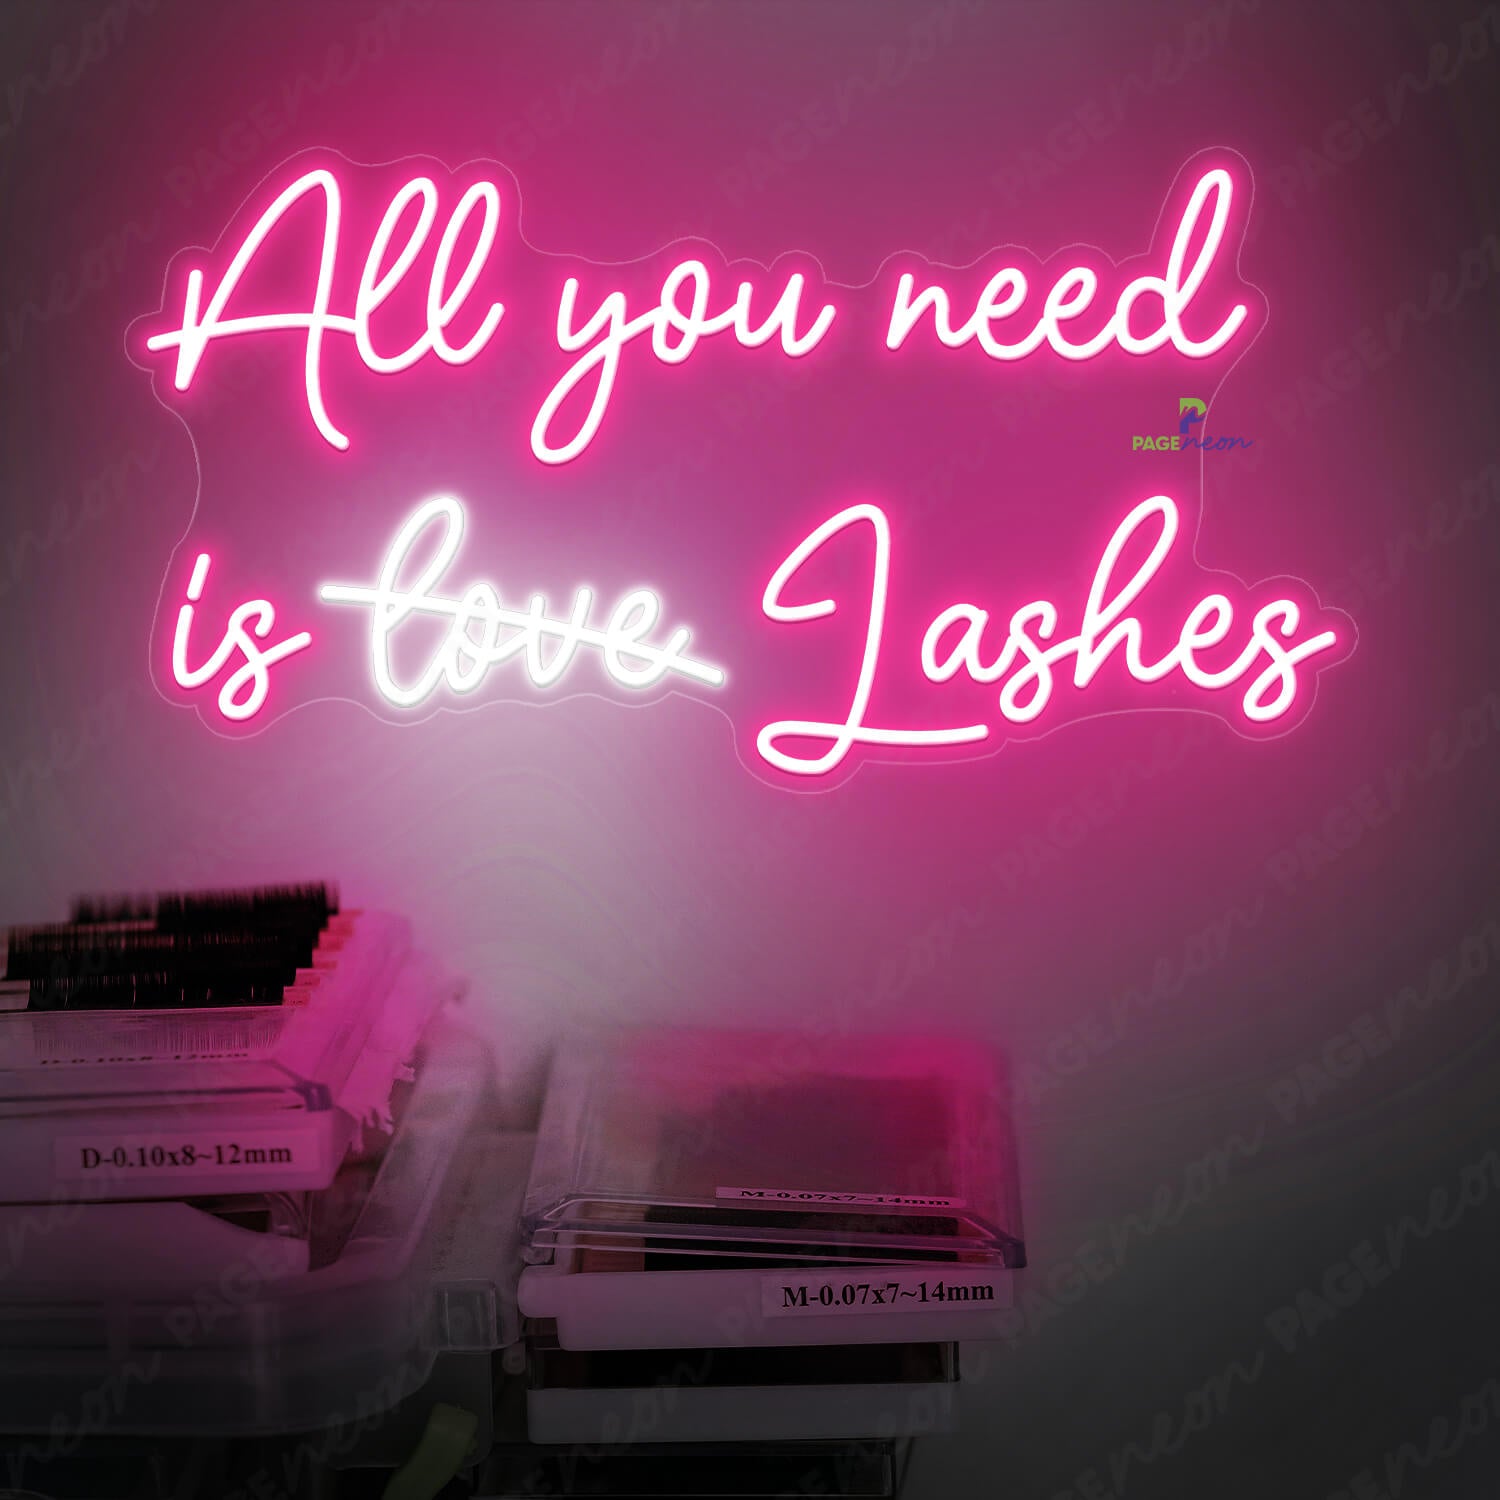 All You Need Is Love Lashes Neon Sign Beauty Led Light Pink